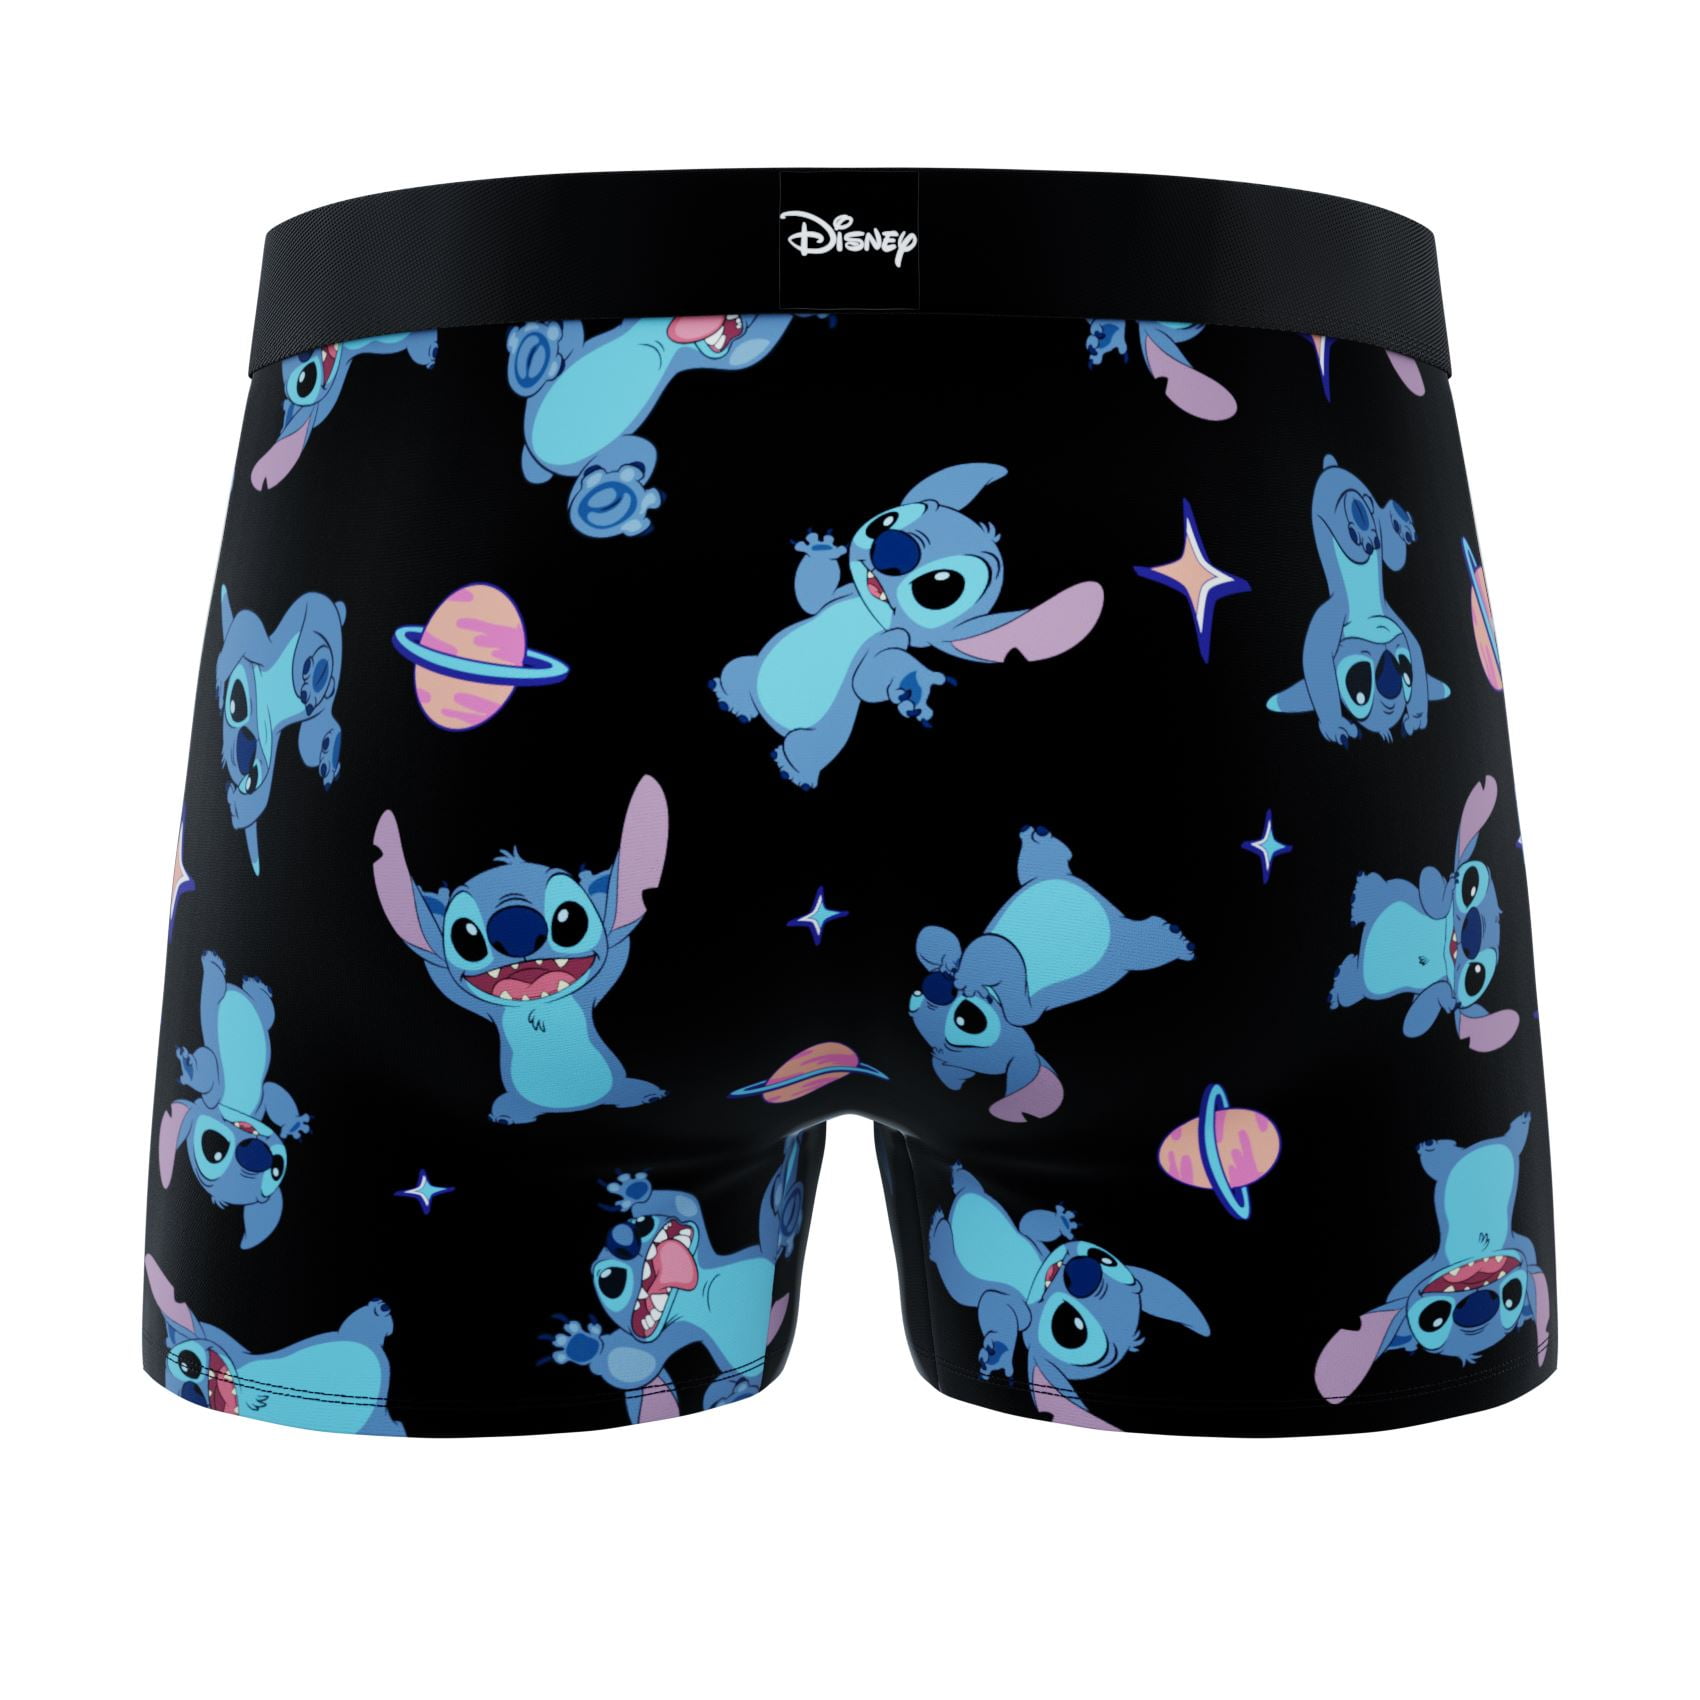 Disney Men's Lilo and Stitch Cotton Knit Holiday Boxer Brief, Red